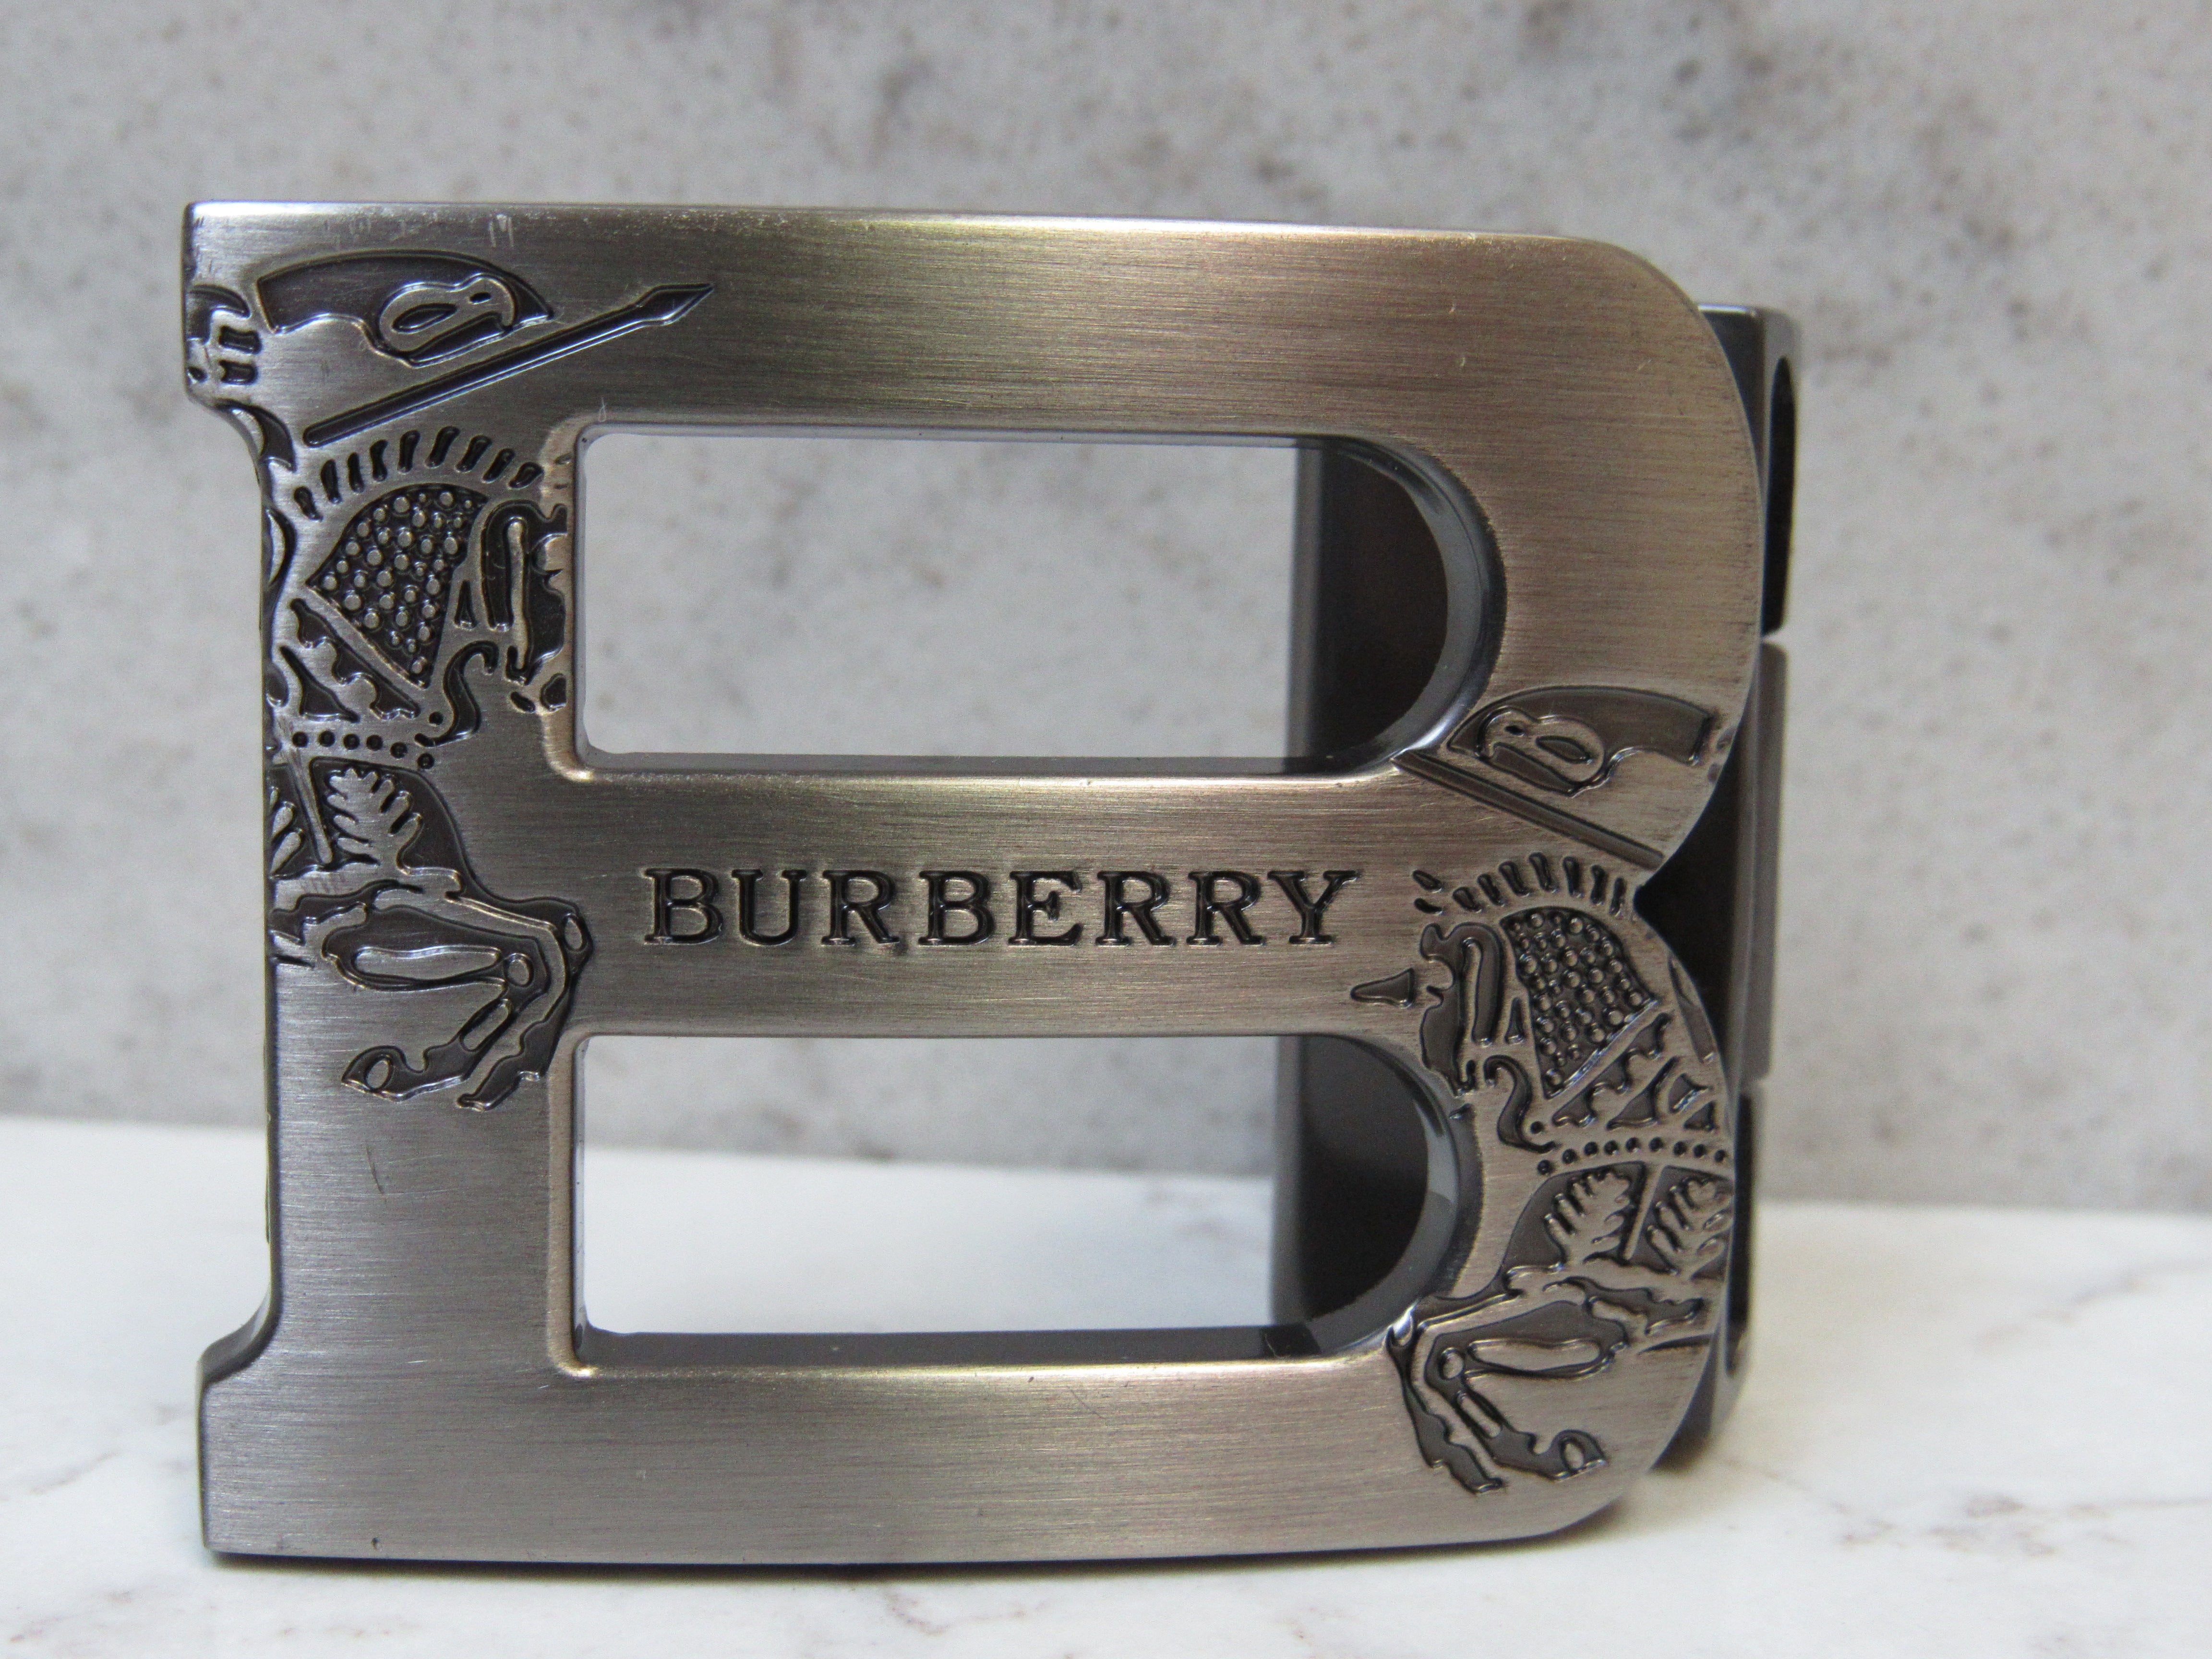 Burberry Pewter Clasp Style Engraved Belt Buckle! – Voodoobuttons